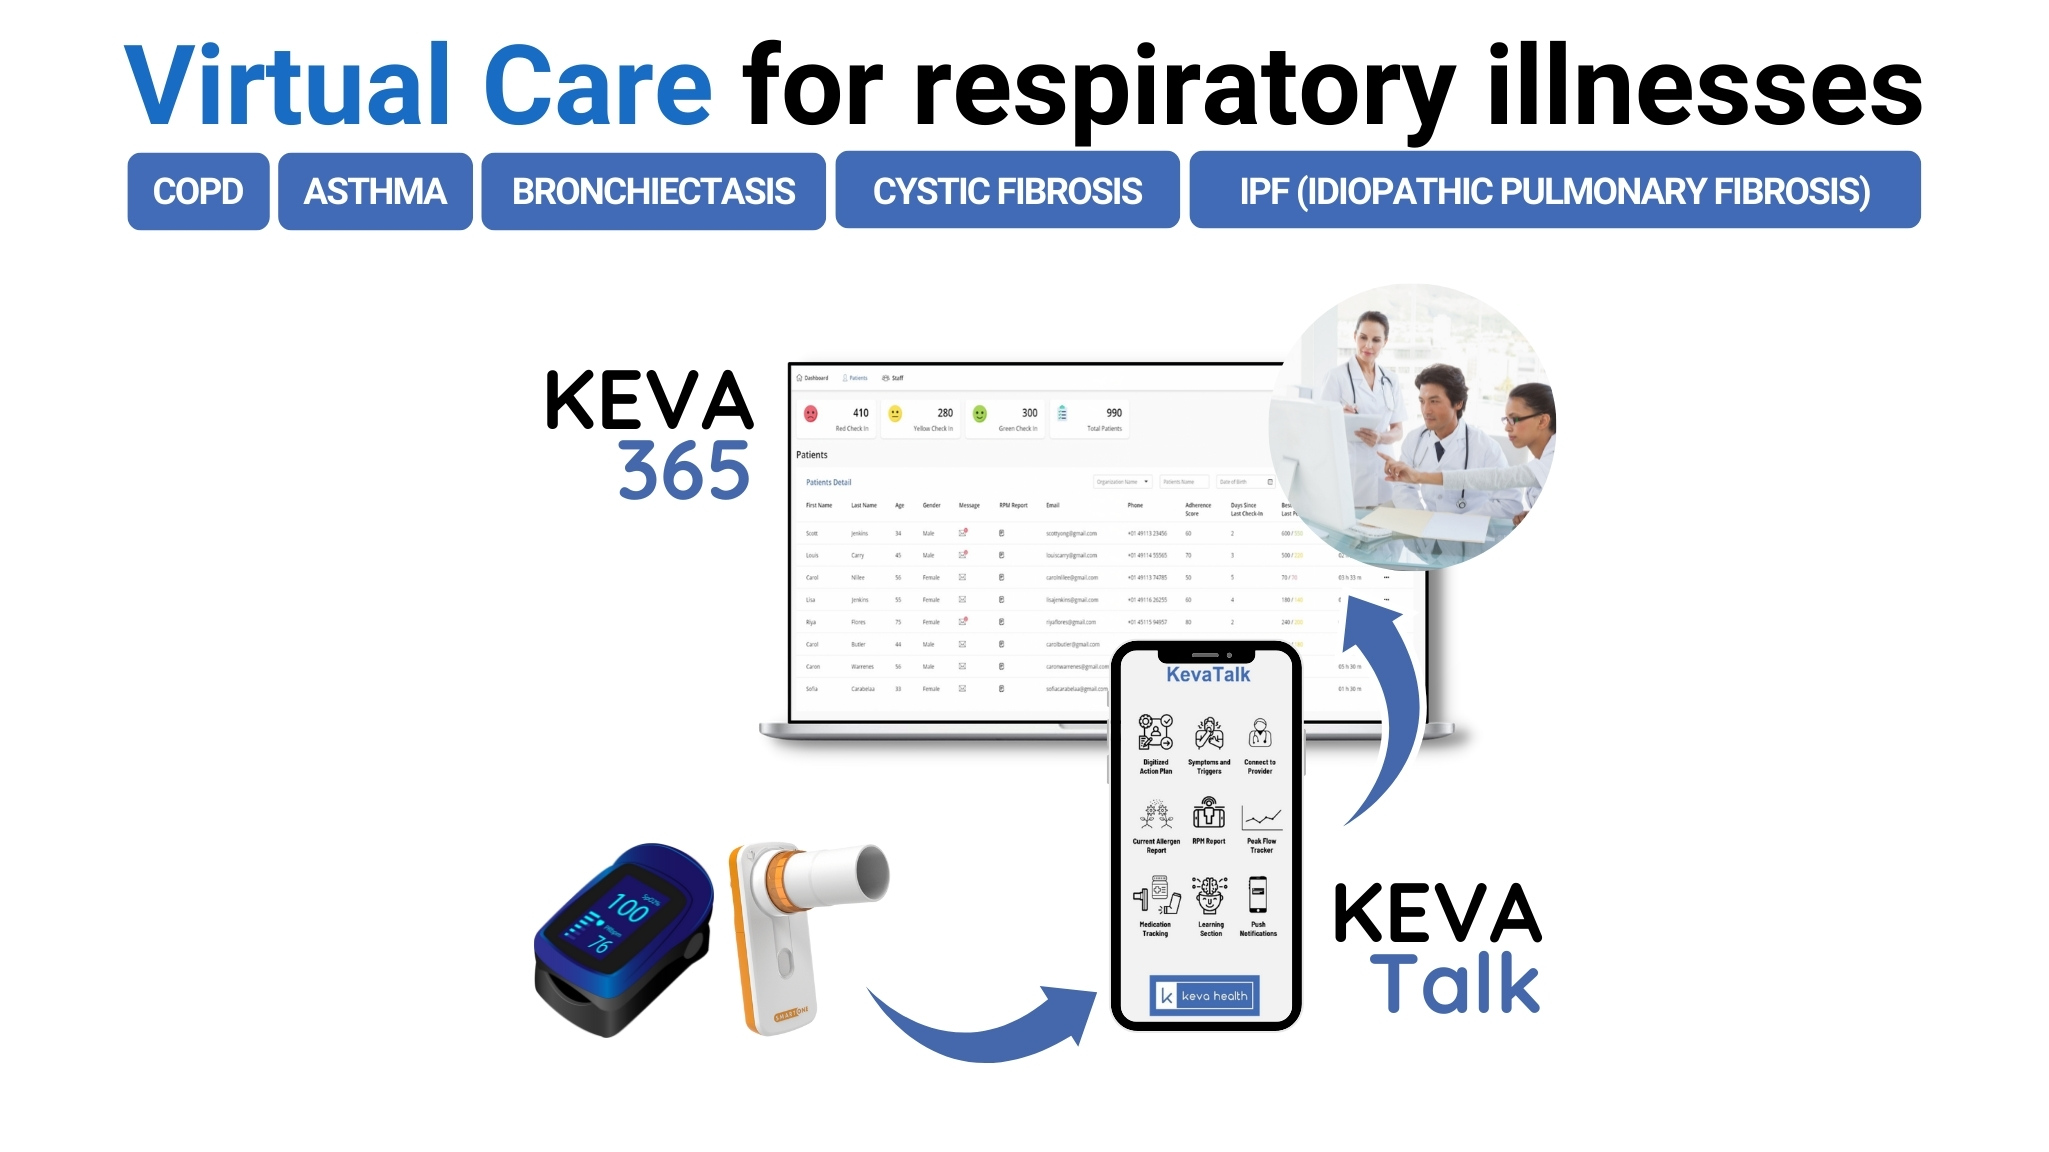 Keva Health to Reveal New Study Results at CHEST Conference